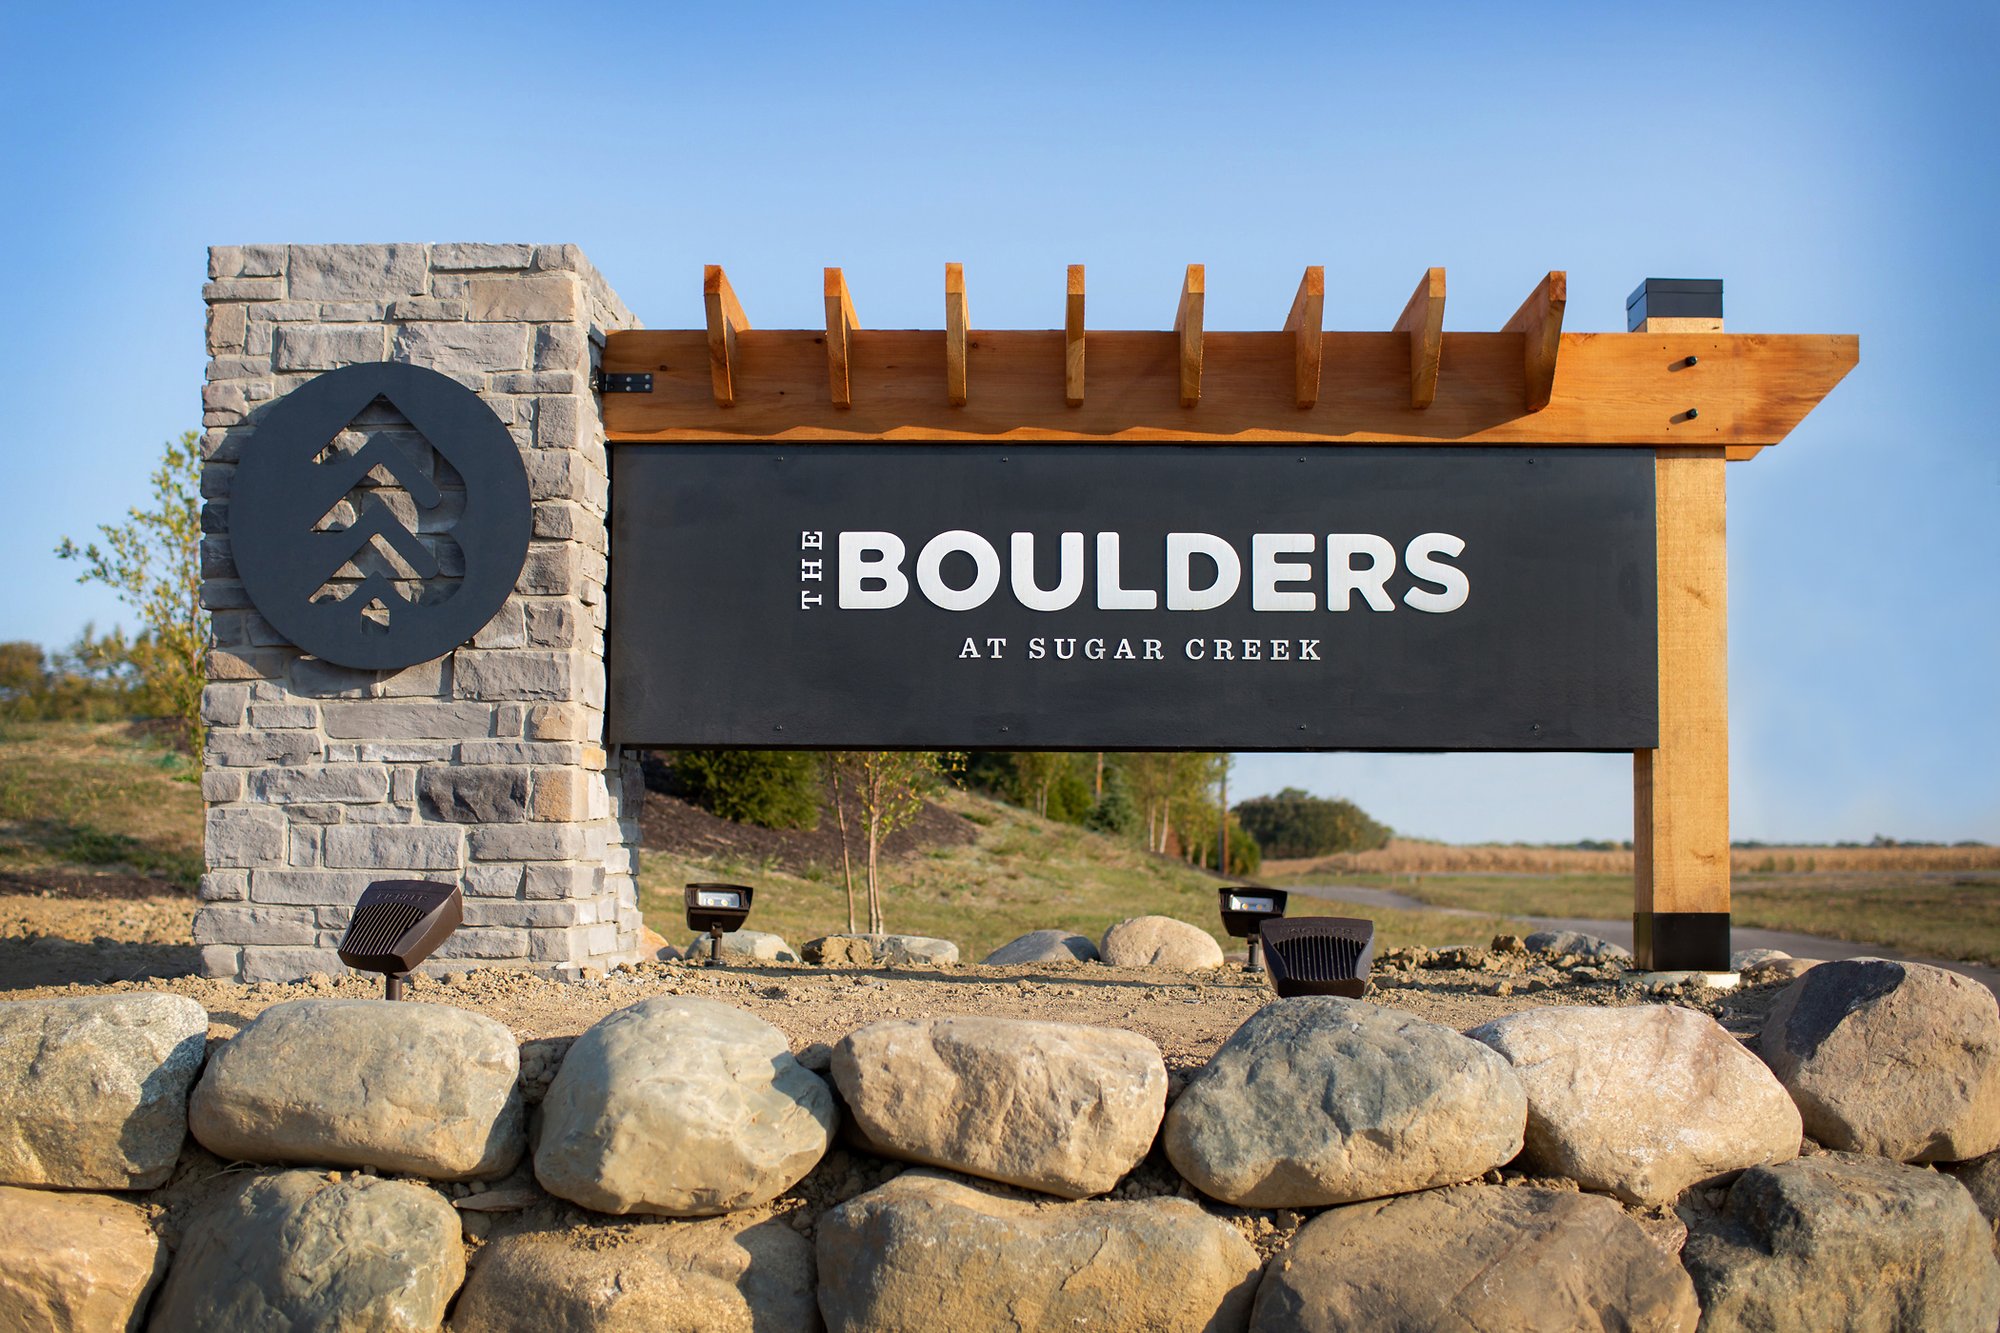 The Boulders Sign